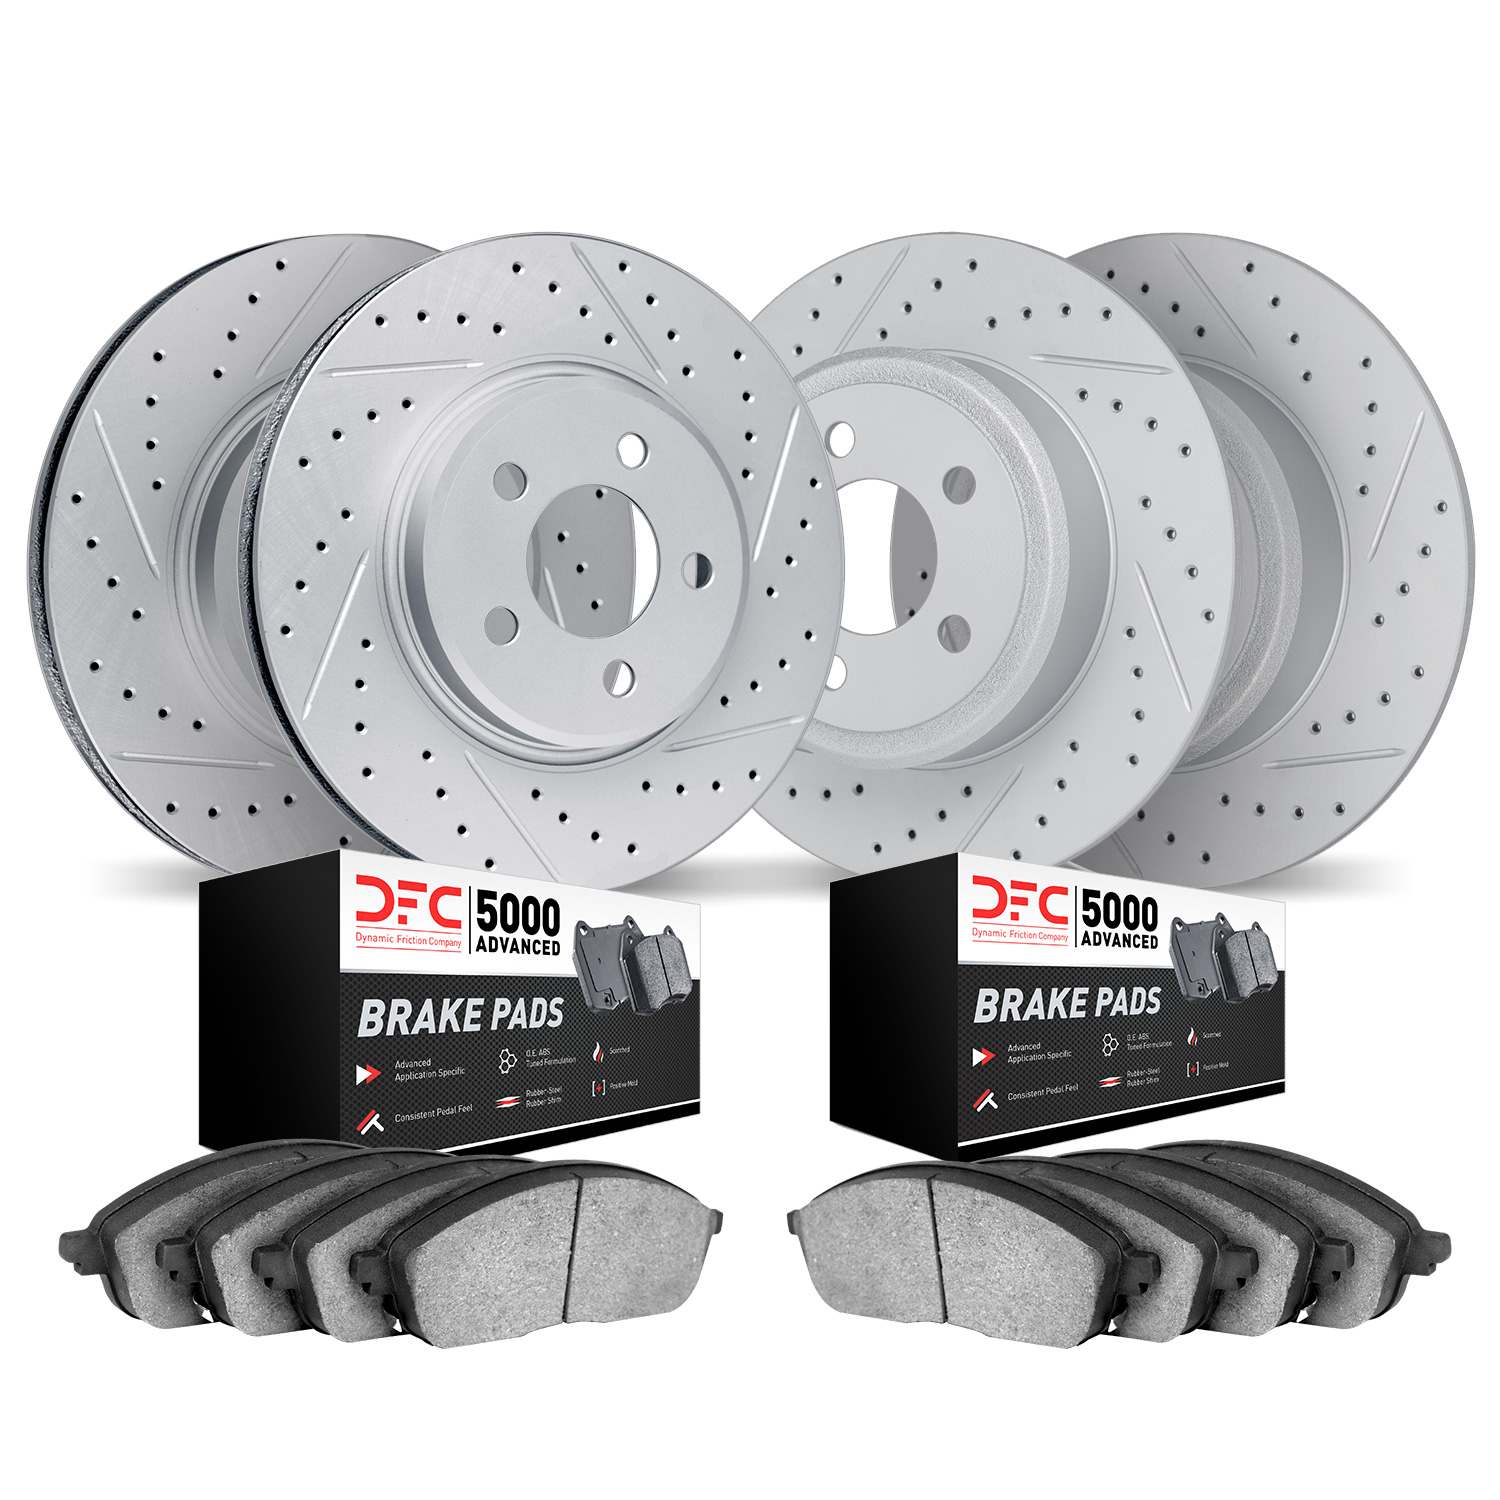 2504-54235 Geoperformance Drilled/Slotted Rotors w/5000 Advanced Brake Pads Kit, 2001-2002 Ford/Lincoln/Mercury/Mazda, Position: